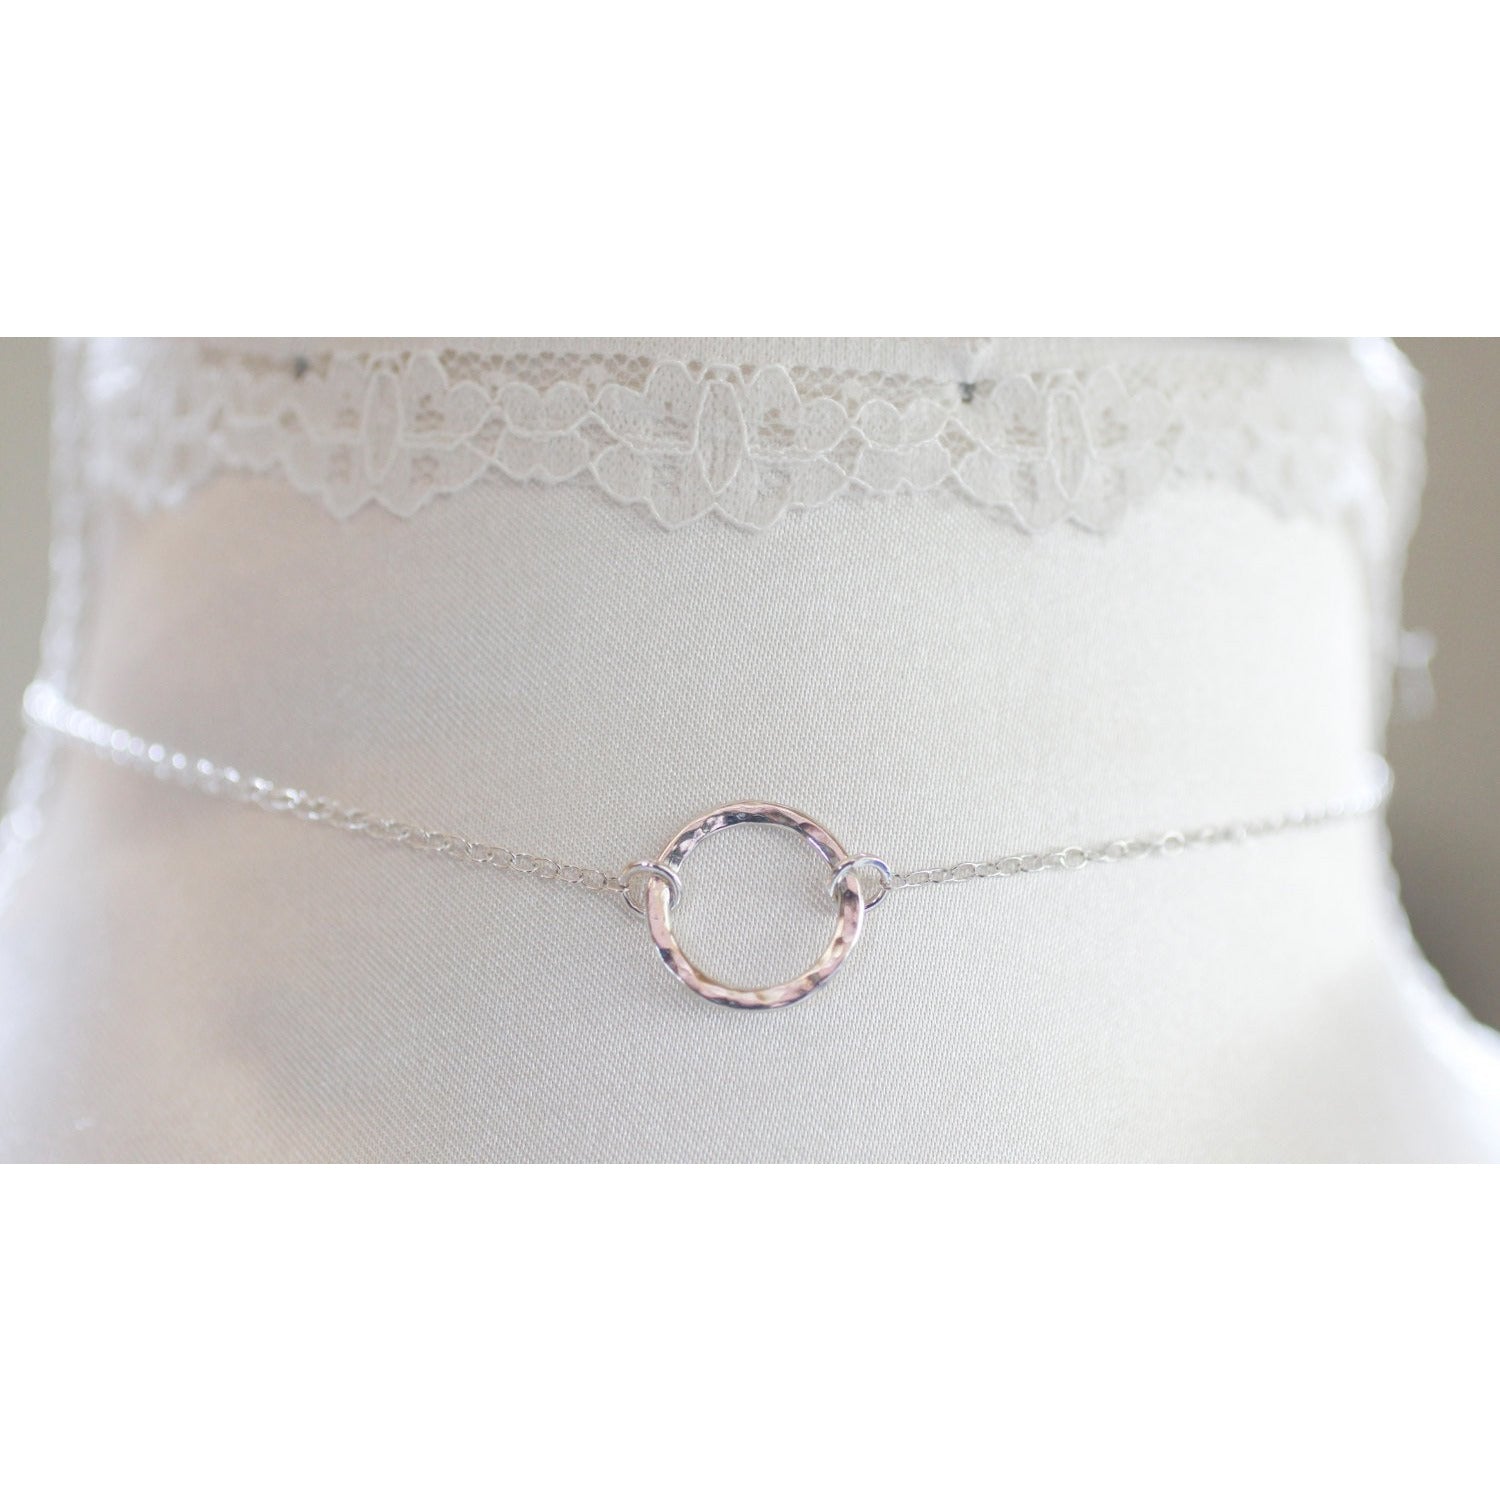 SUBMISSIVE DAY COLLAR,BDSM STERLING SILVER,DISCREET DAY COLLAR, HAMMERED O RING.